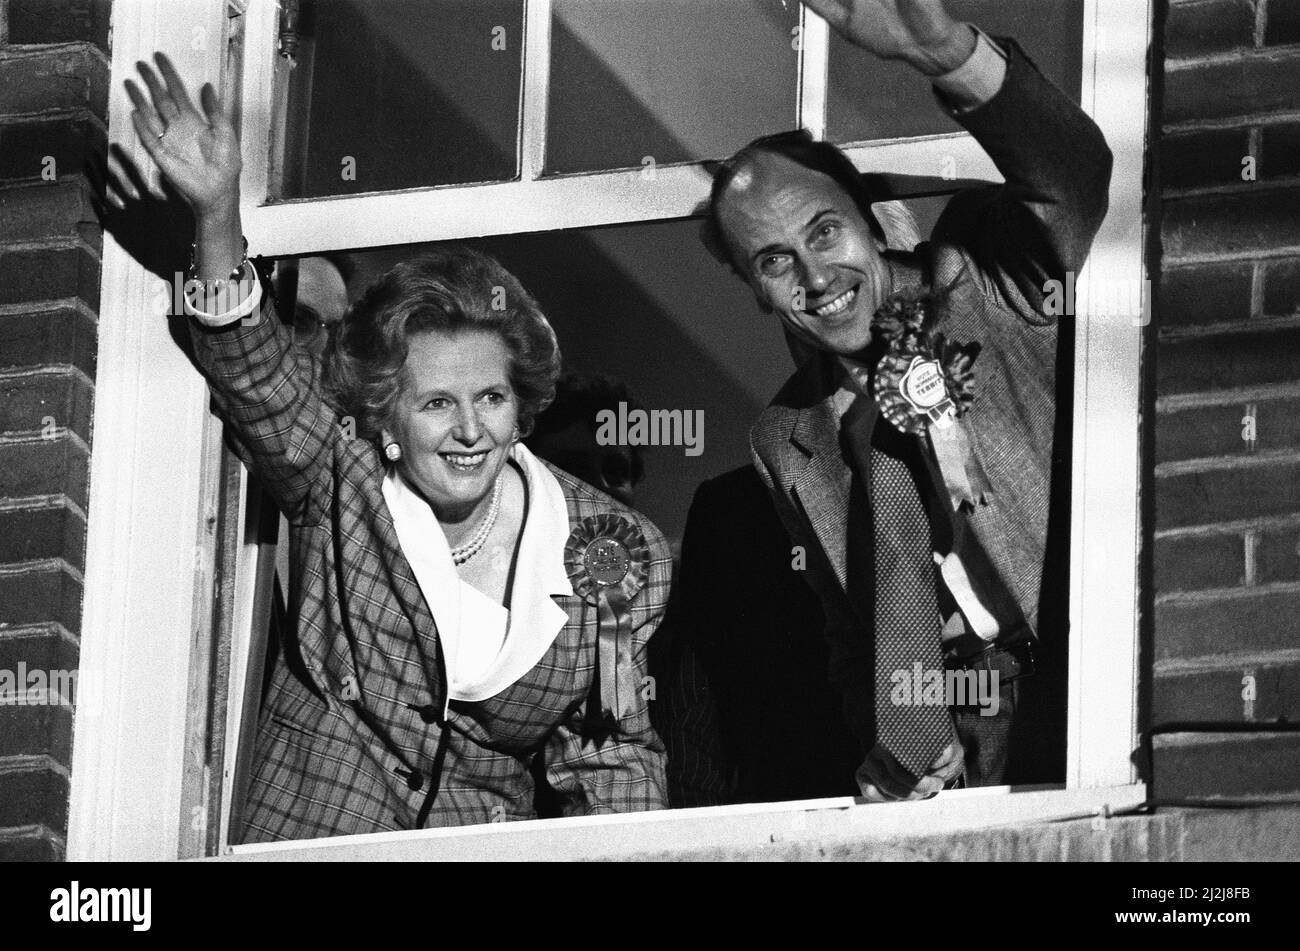 Prime Minister Margaret Thatcher  and Conservative Party chairman, Norman Tebbit, celebrate winning a third term in government for the Conservative Party, from a window at Conservative Central Office in Smith Square, Westminster. 12 June 1987. Stock Photo